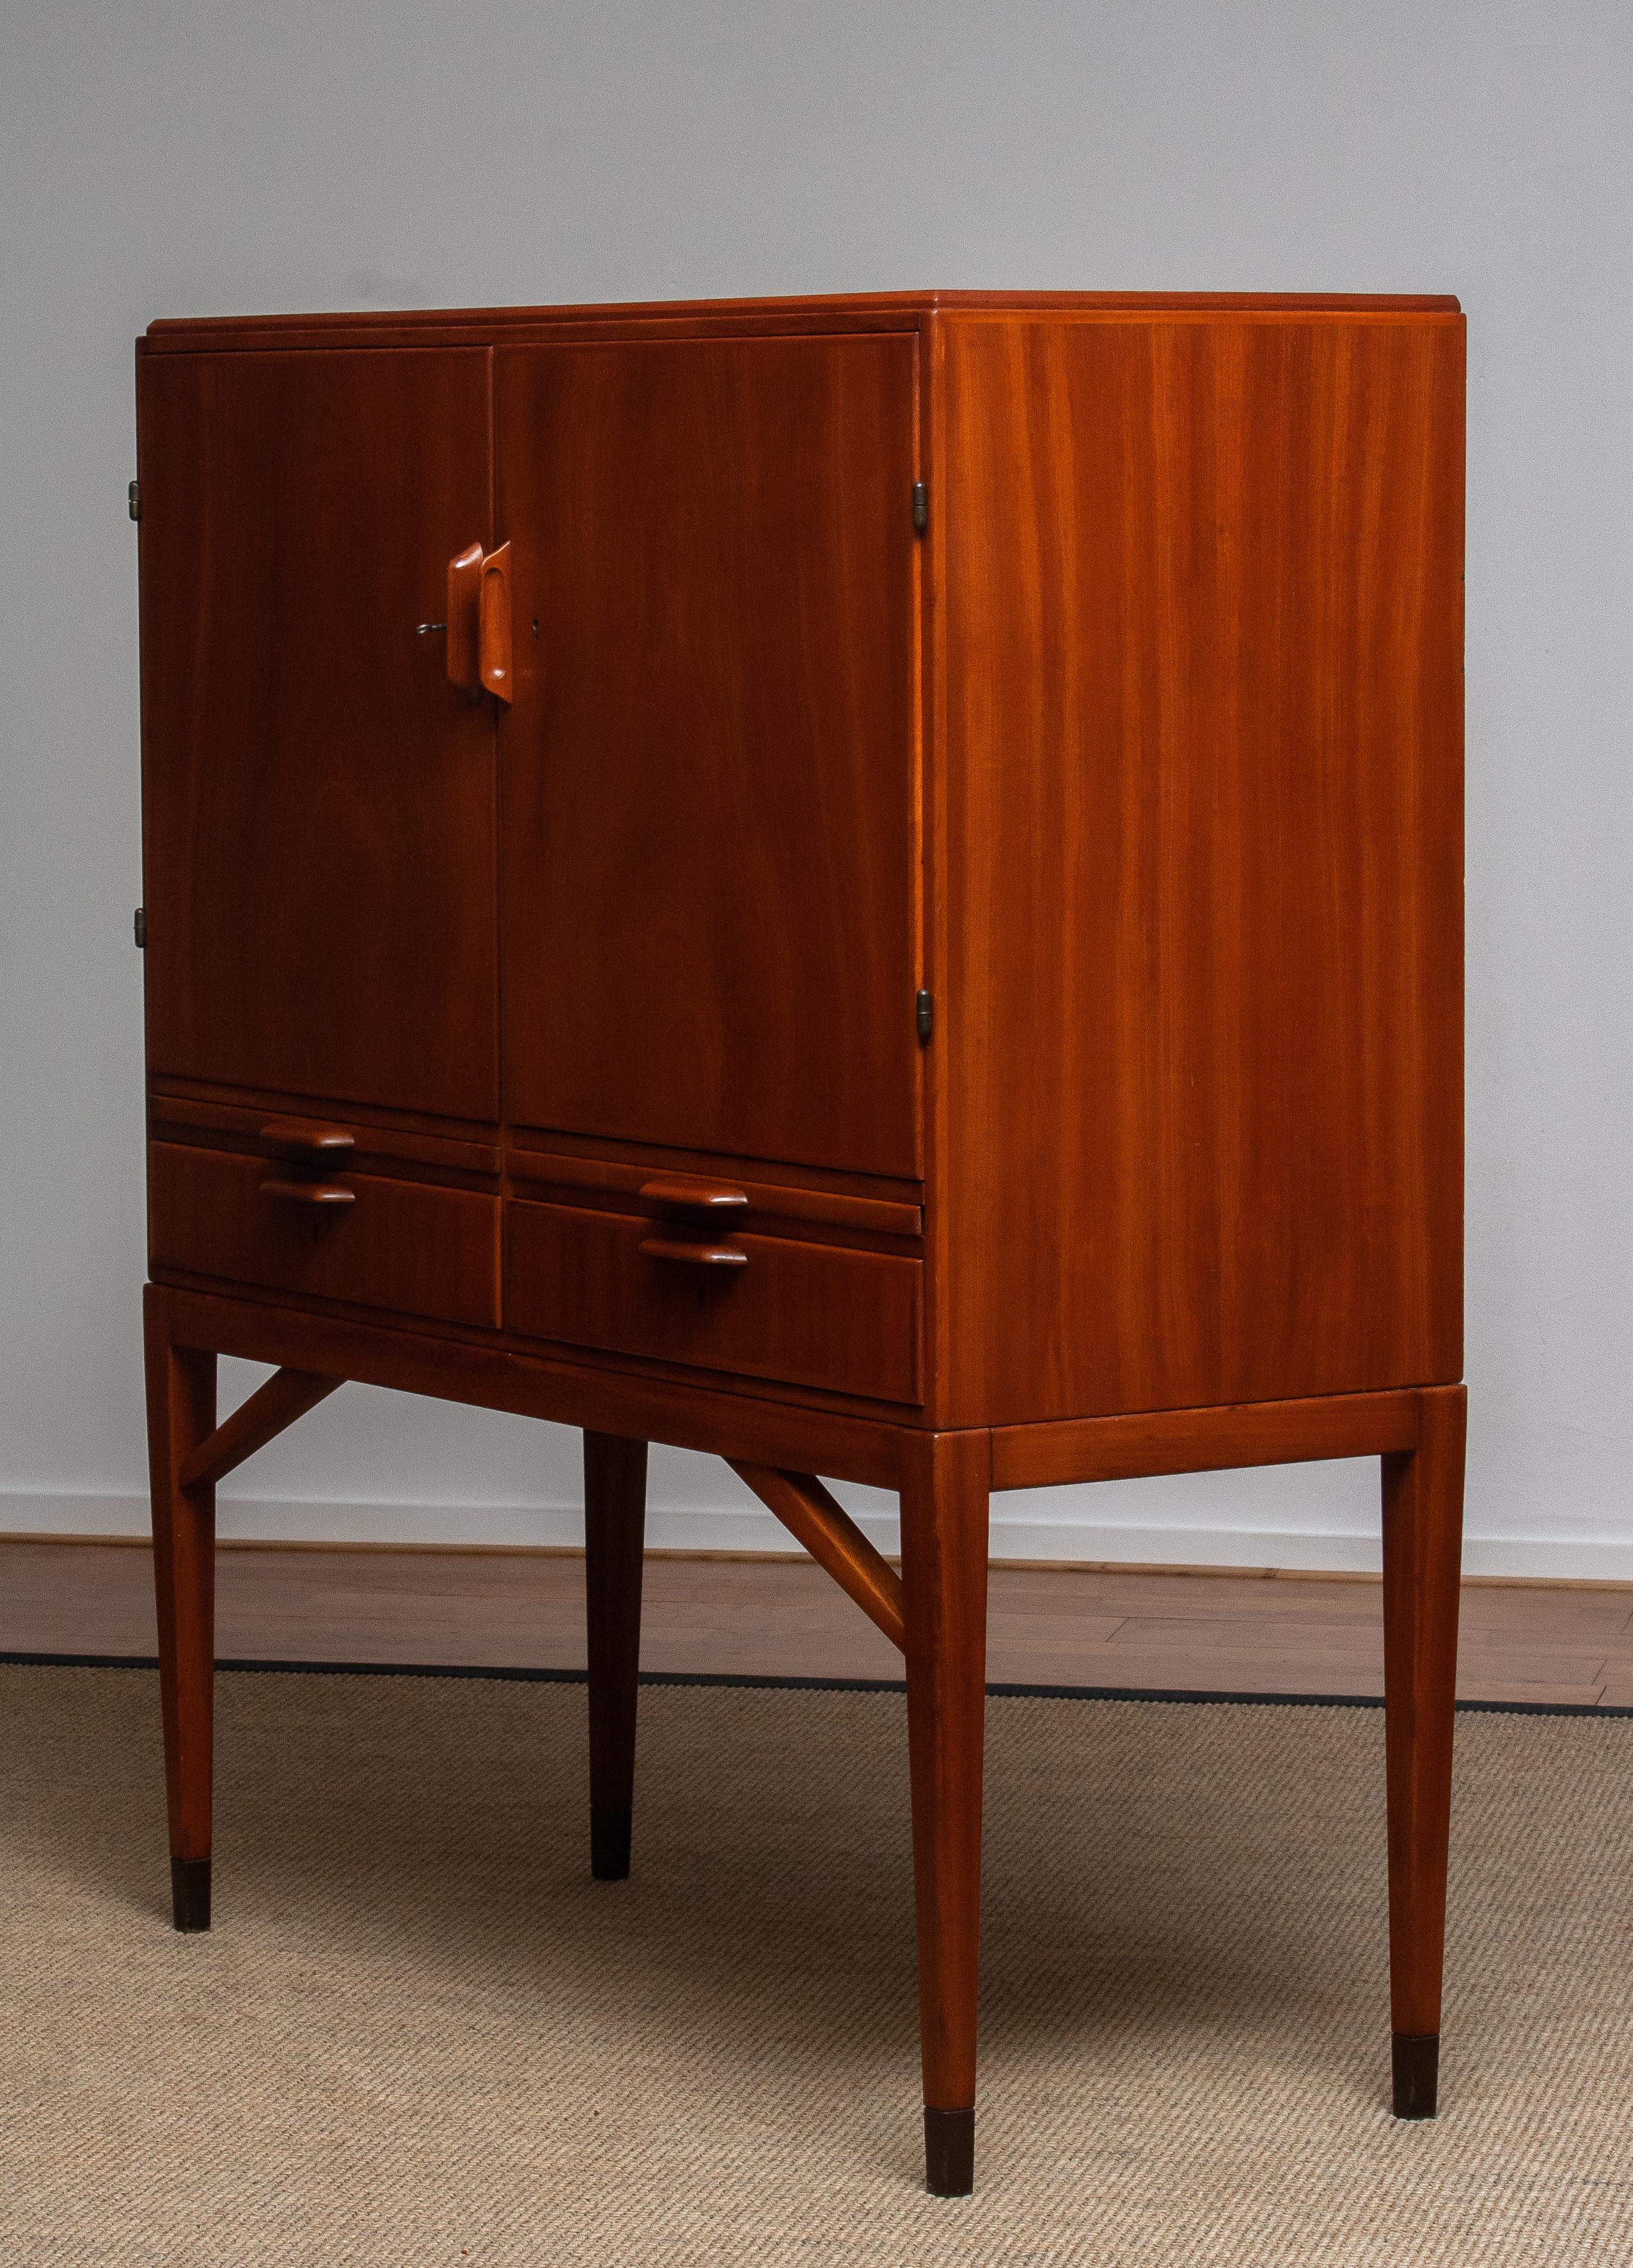 1950s, High Quality Mahogany Dry Bar / Cabinet Made by Marbo Sweden, SMI Labeled 13